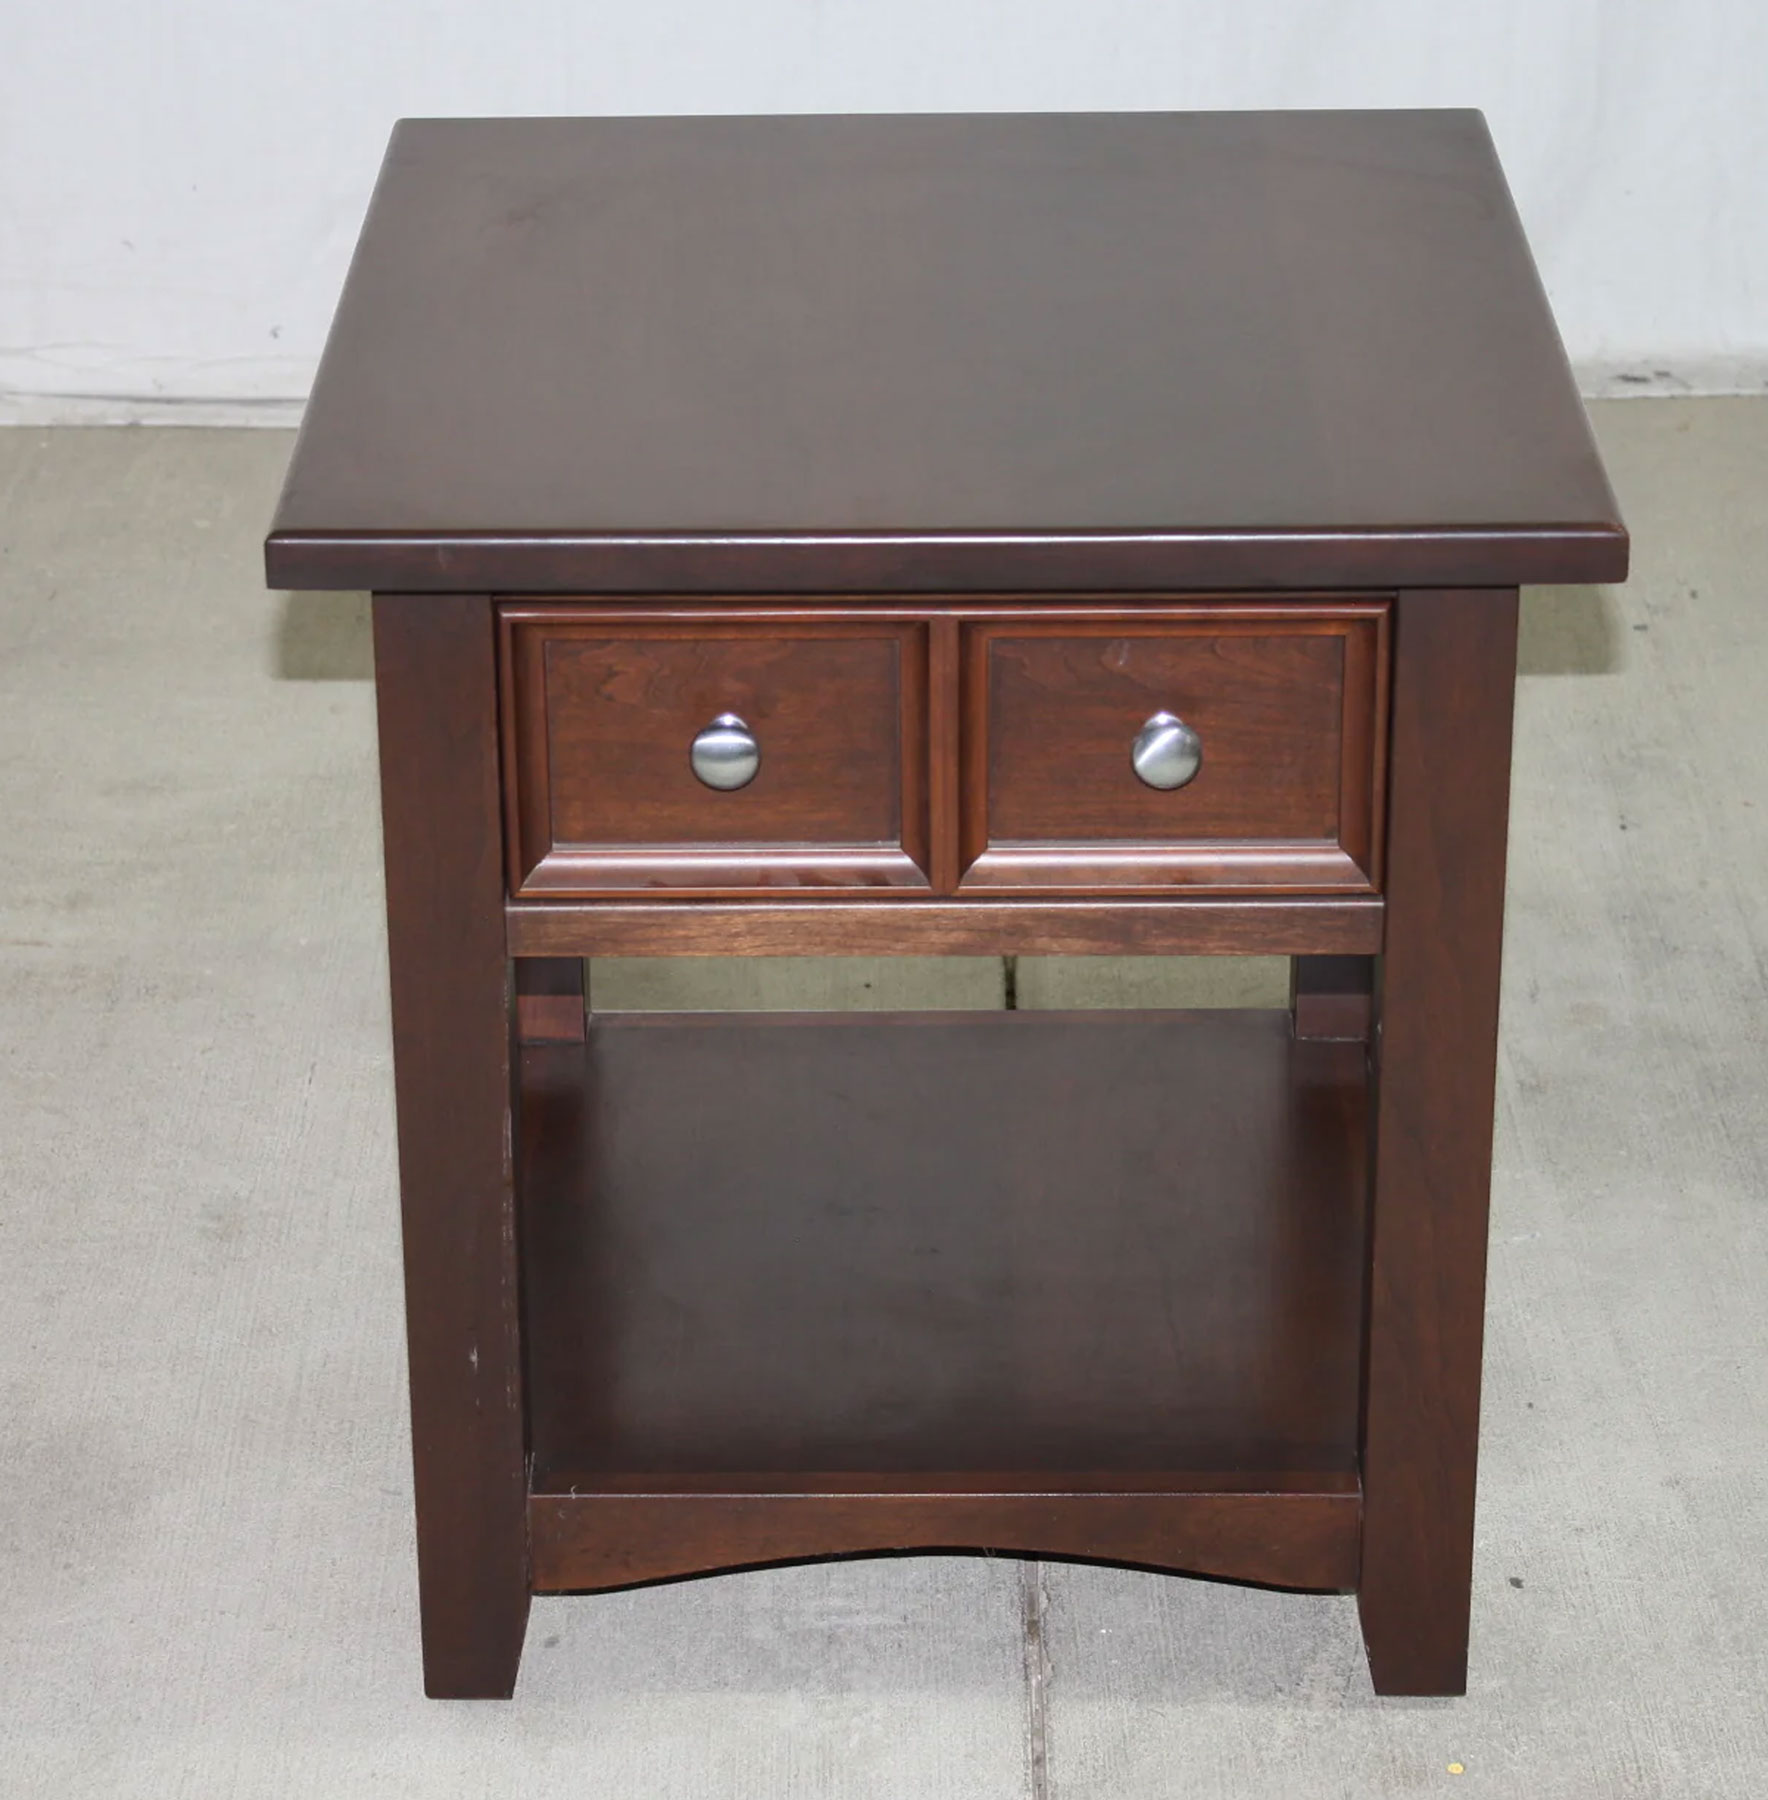 Garnet Hill End Table with Drawers in Cherry